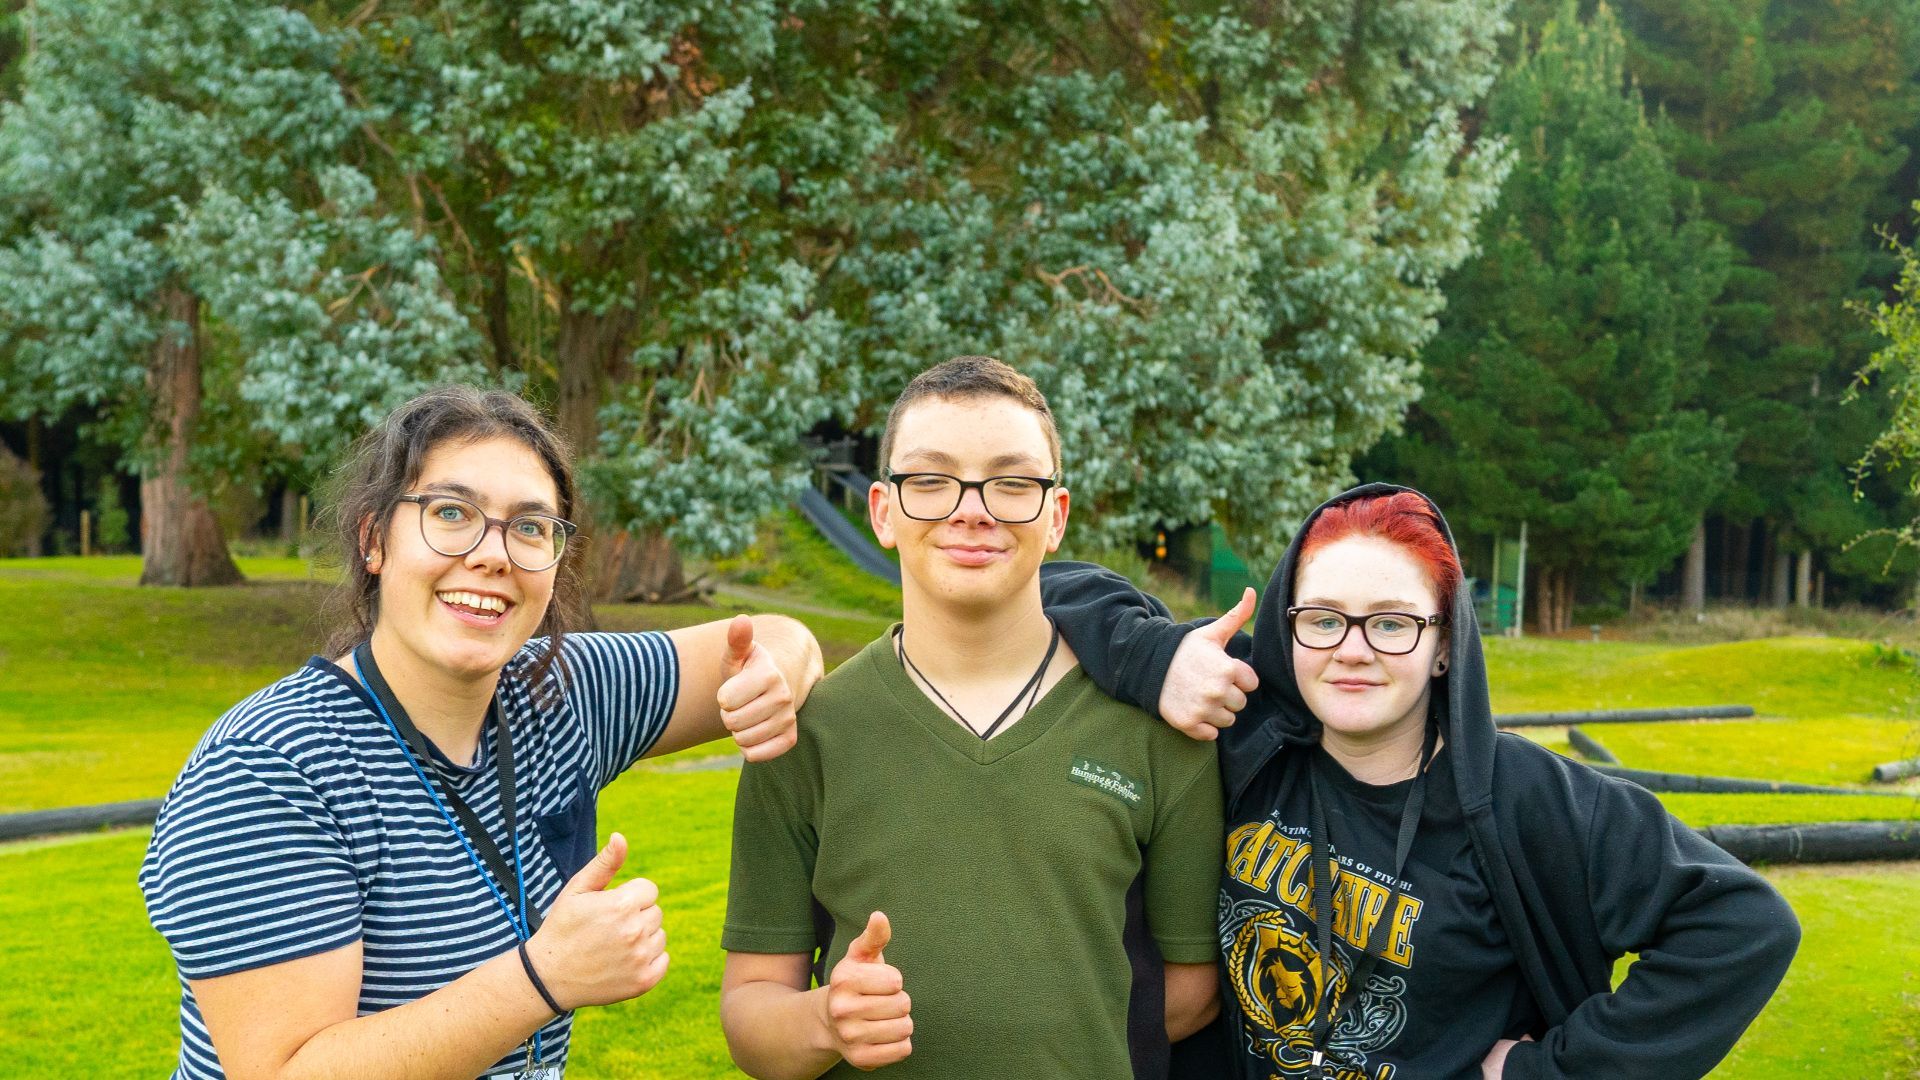 Three people smiling with their thumbs up